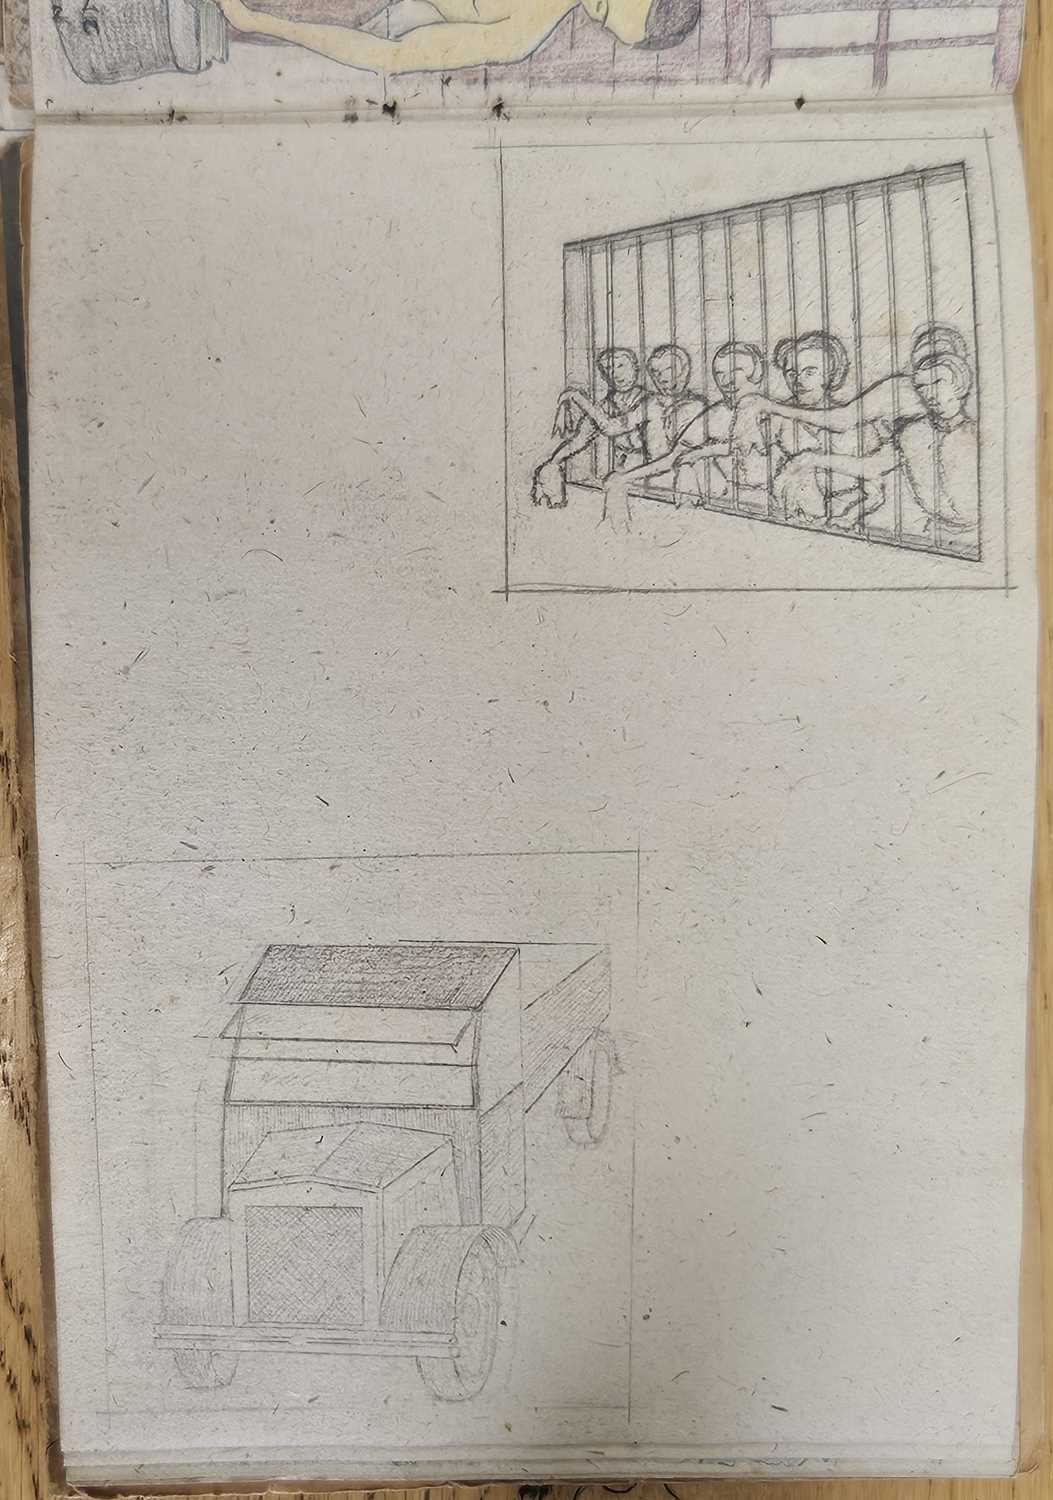 Rare Second World War sketchbook by POW 2nd/Lt Arkless Lockey - Image 17 of 35